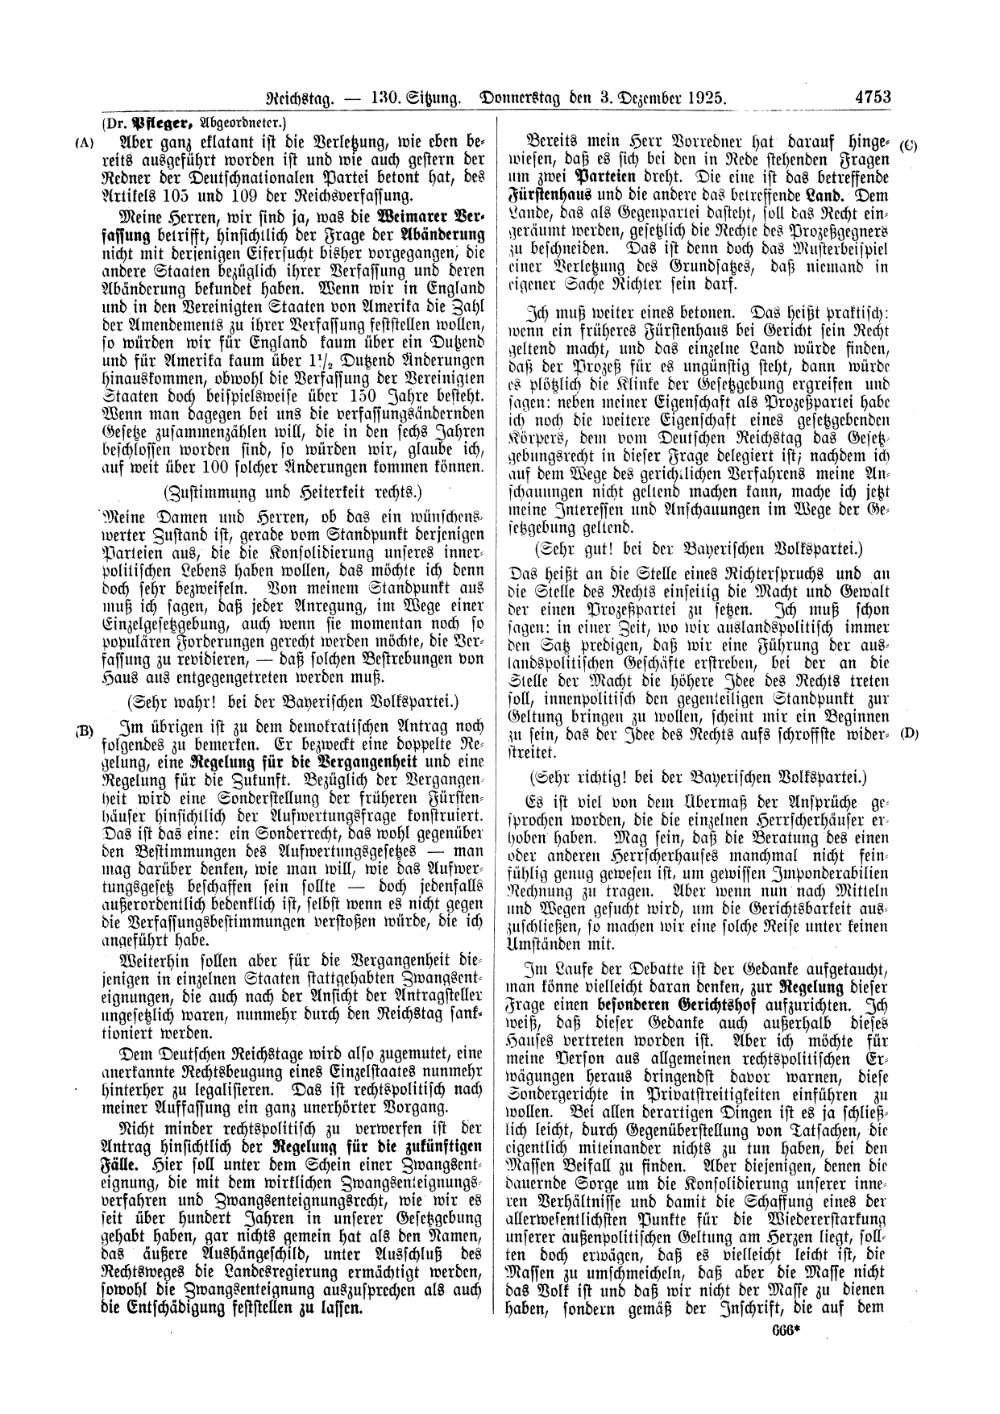 Scan of page 4753